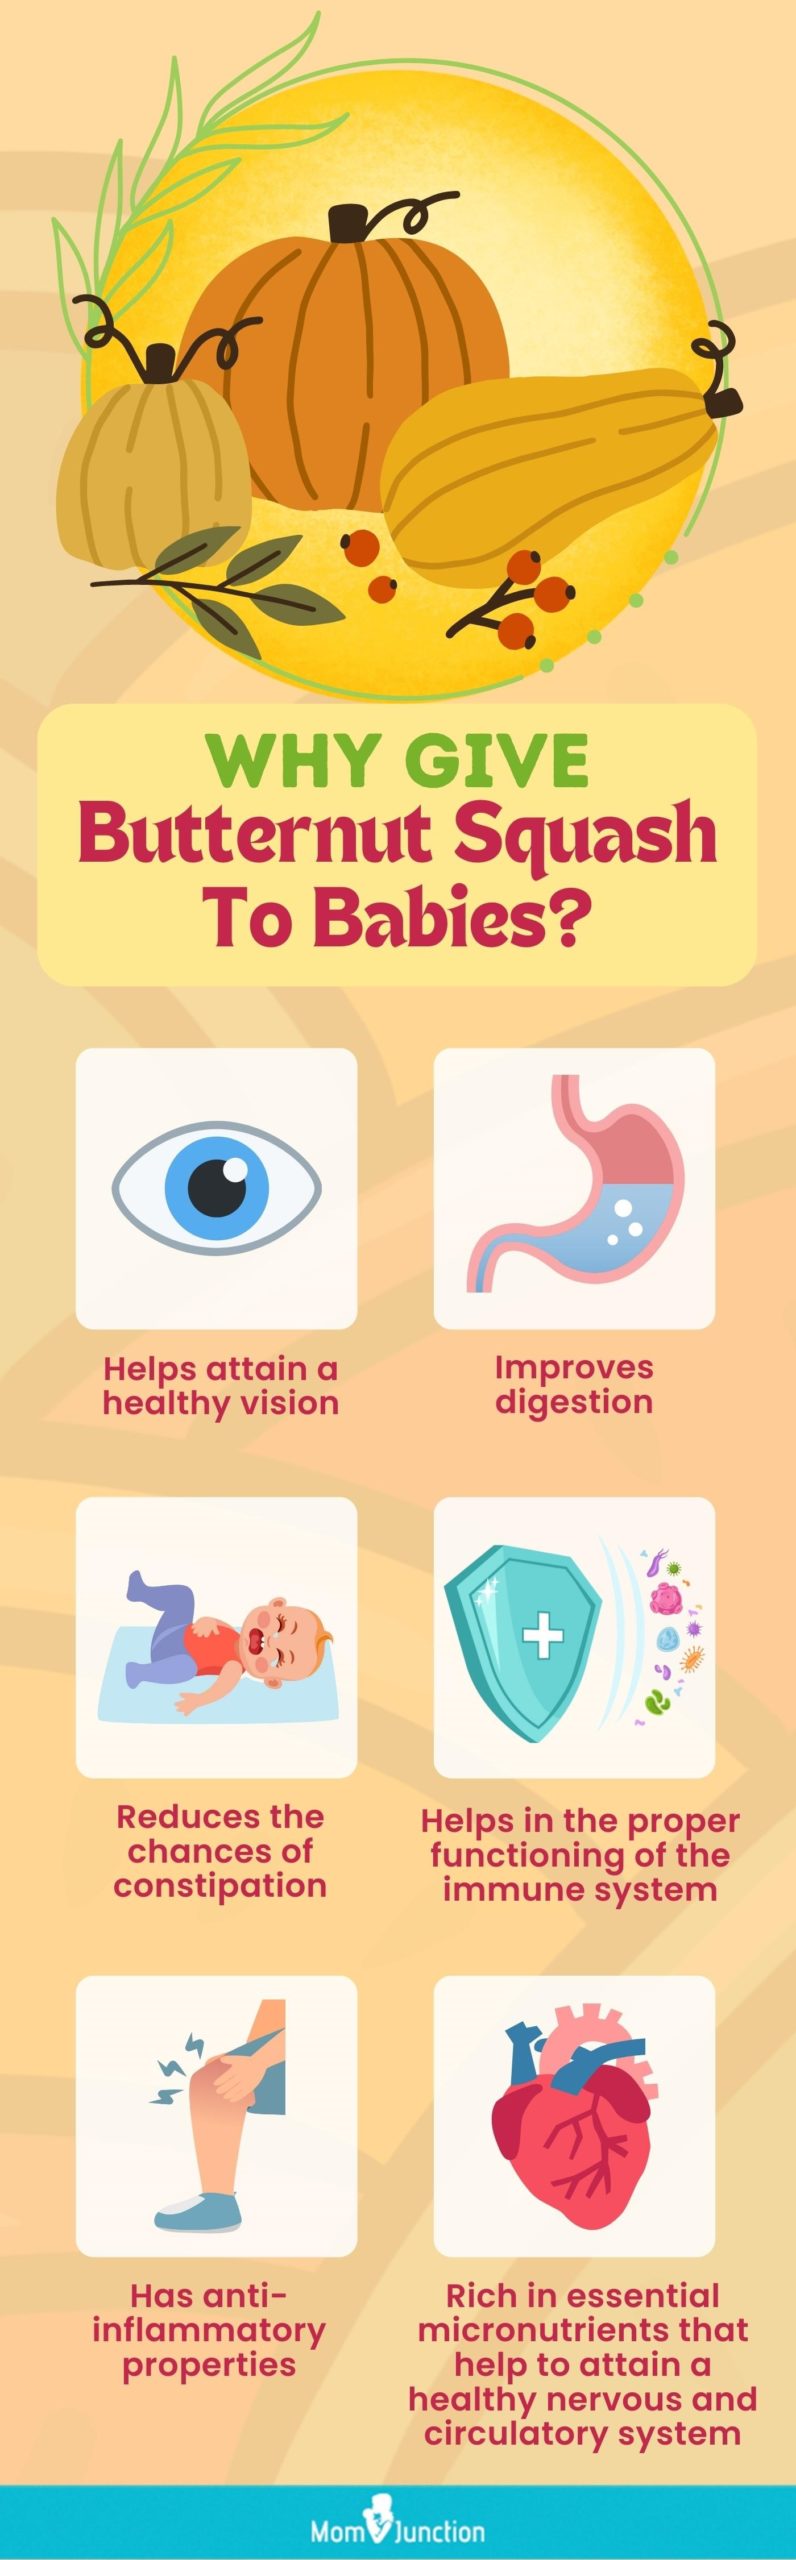 why give butternut squash to babies [infographic]